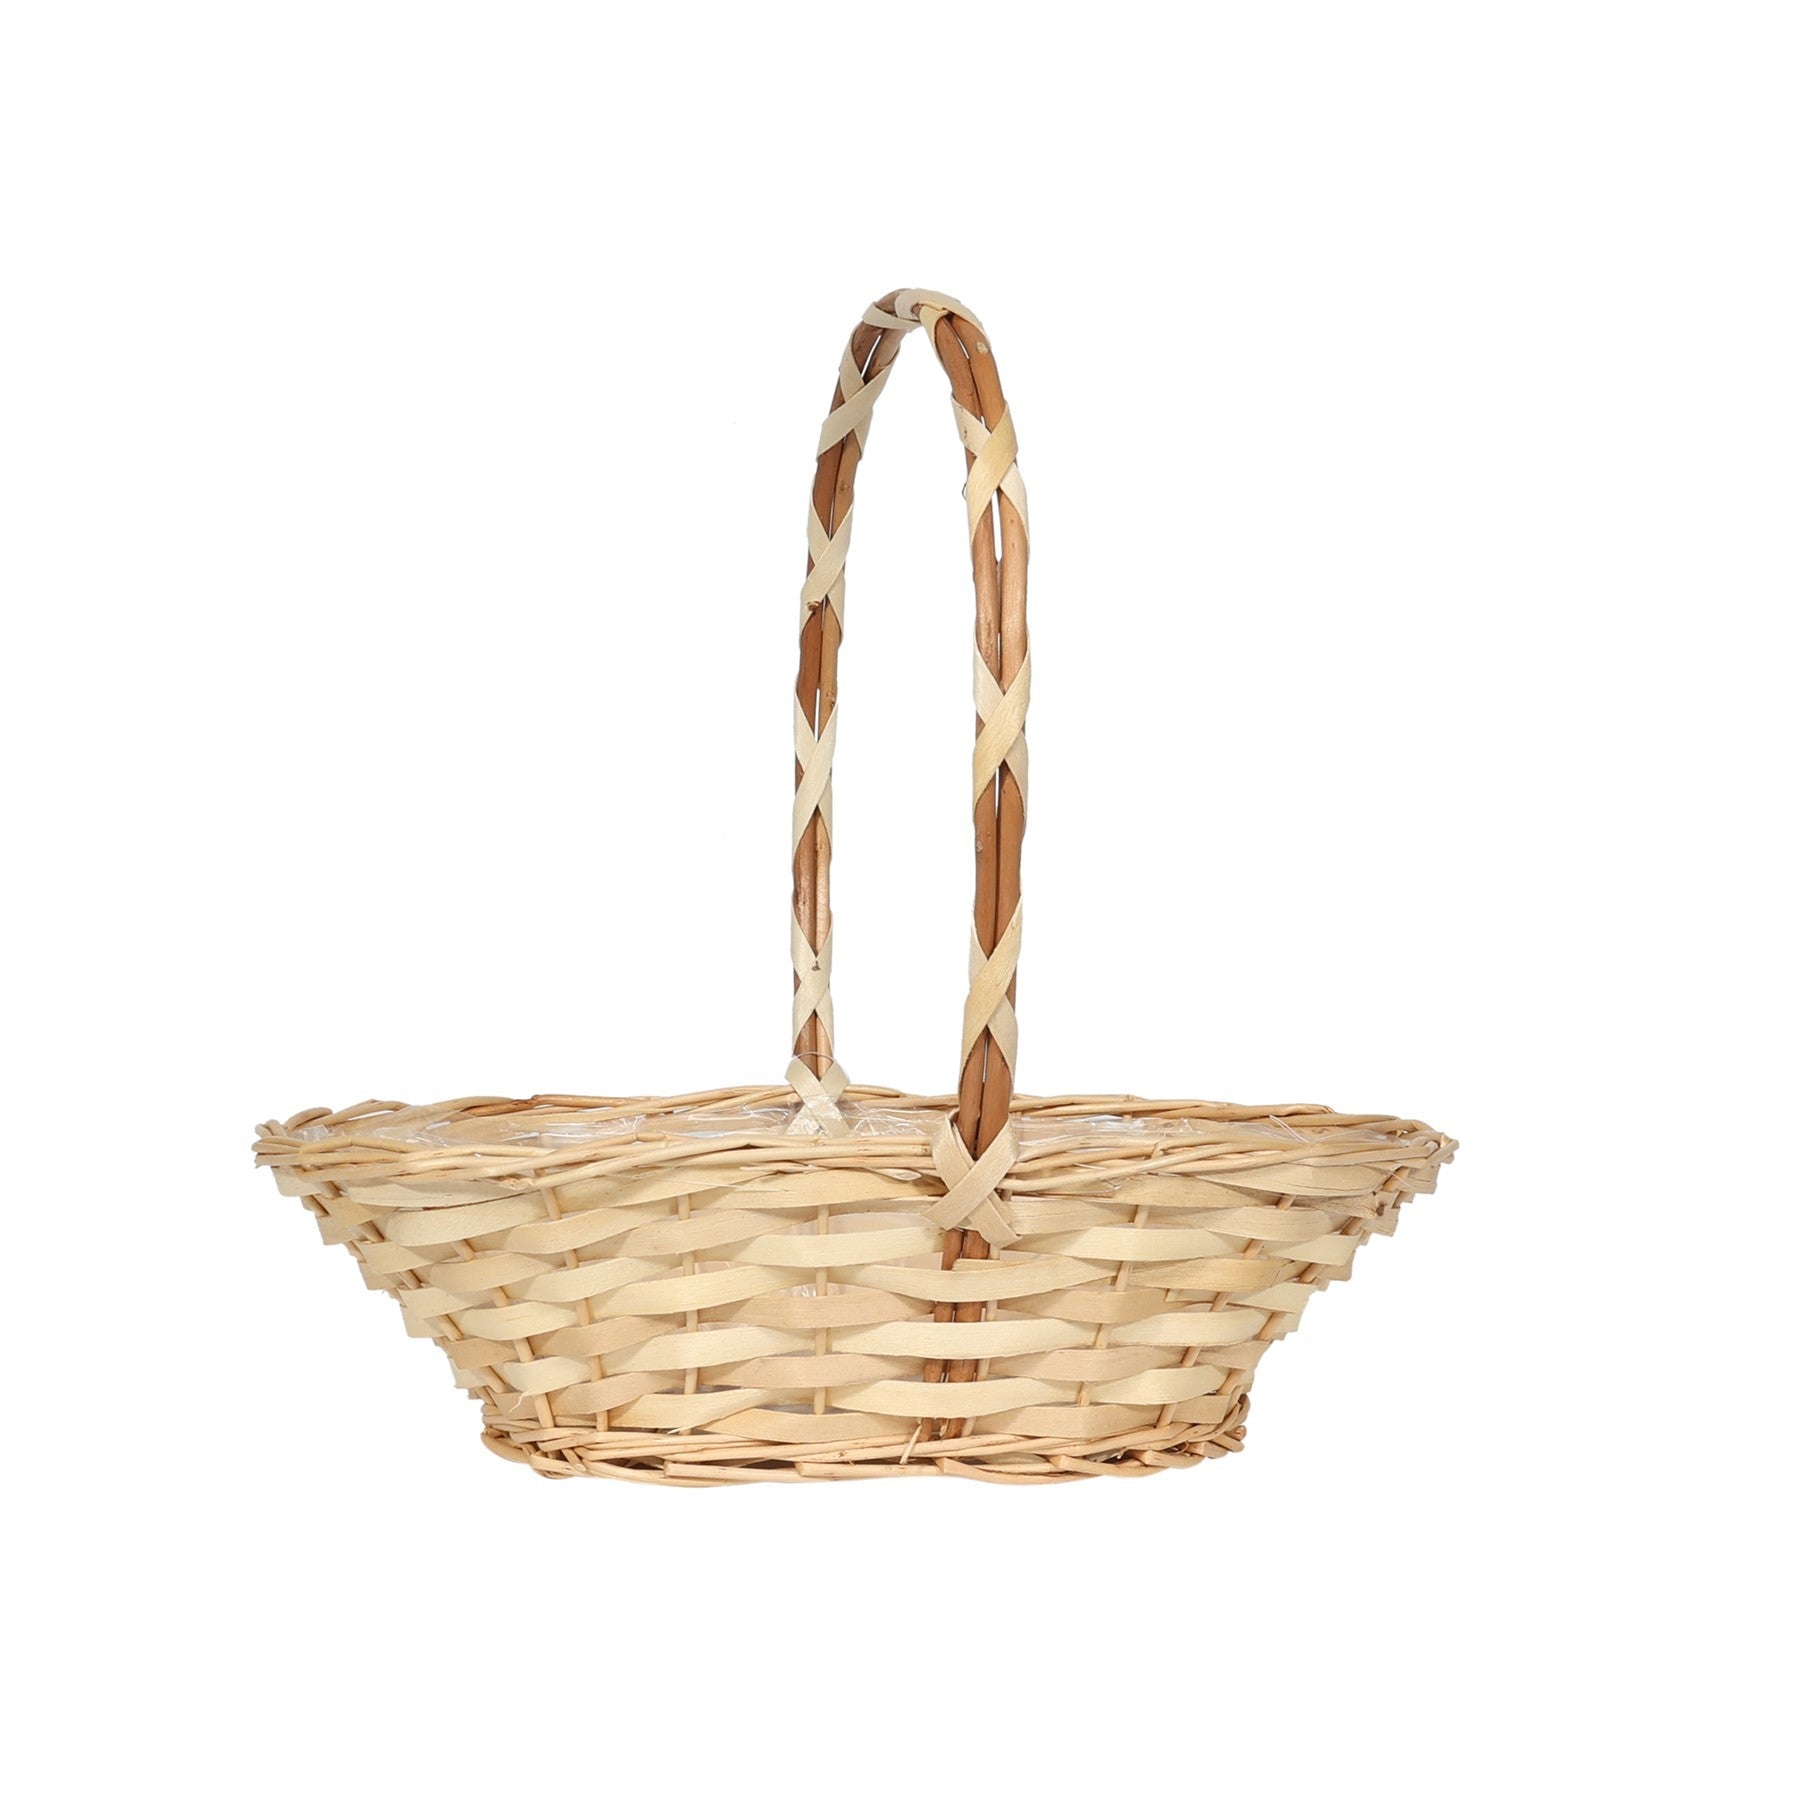 View Large Single Peeled Country Basket information